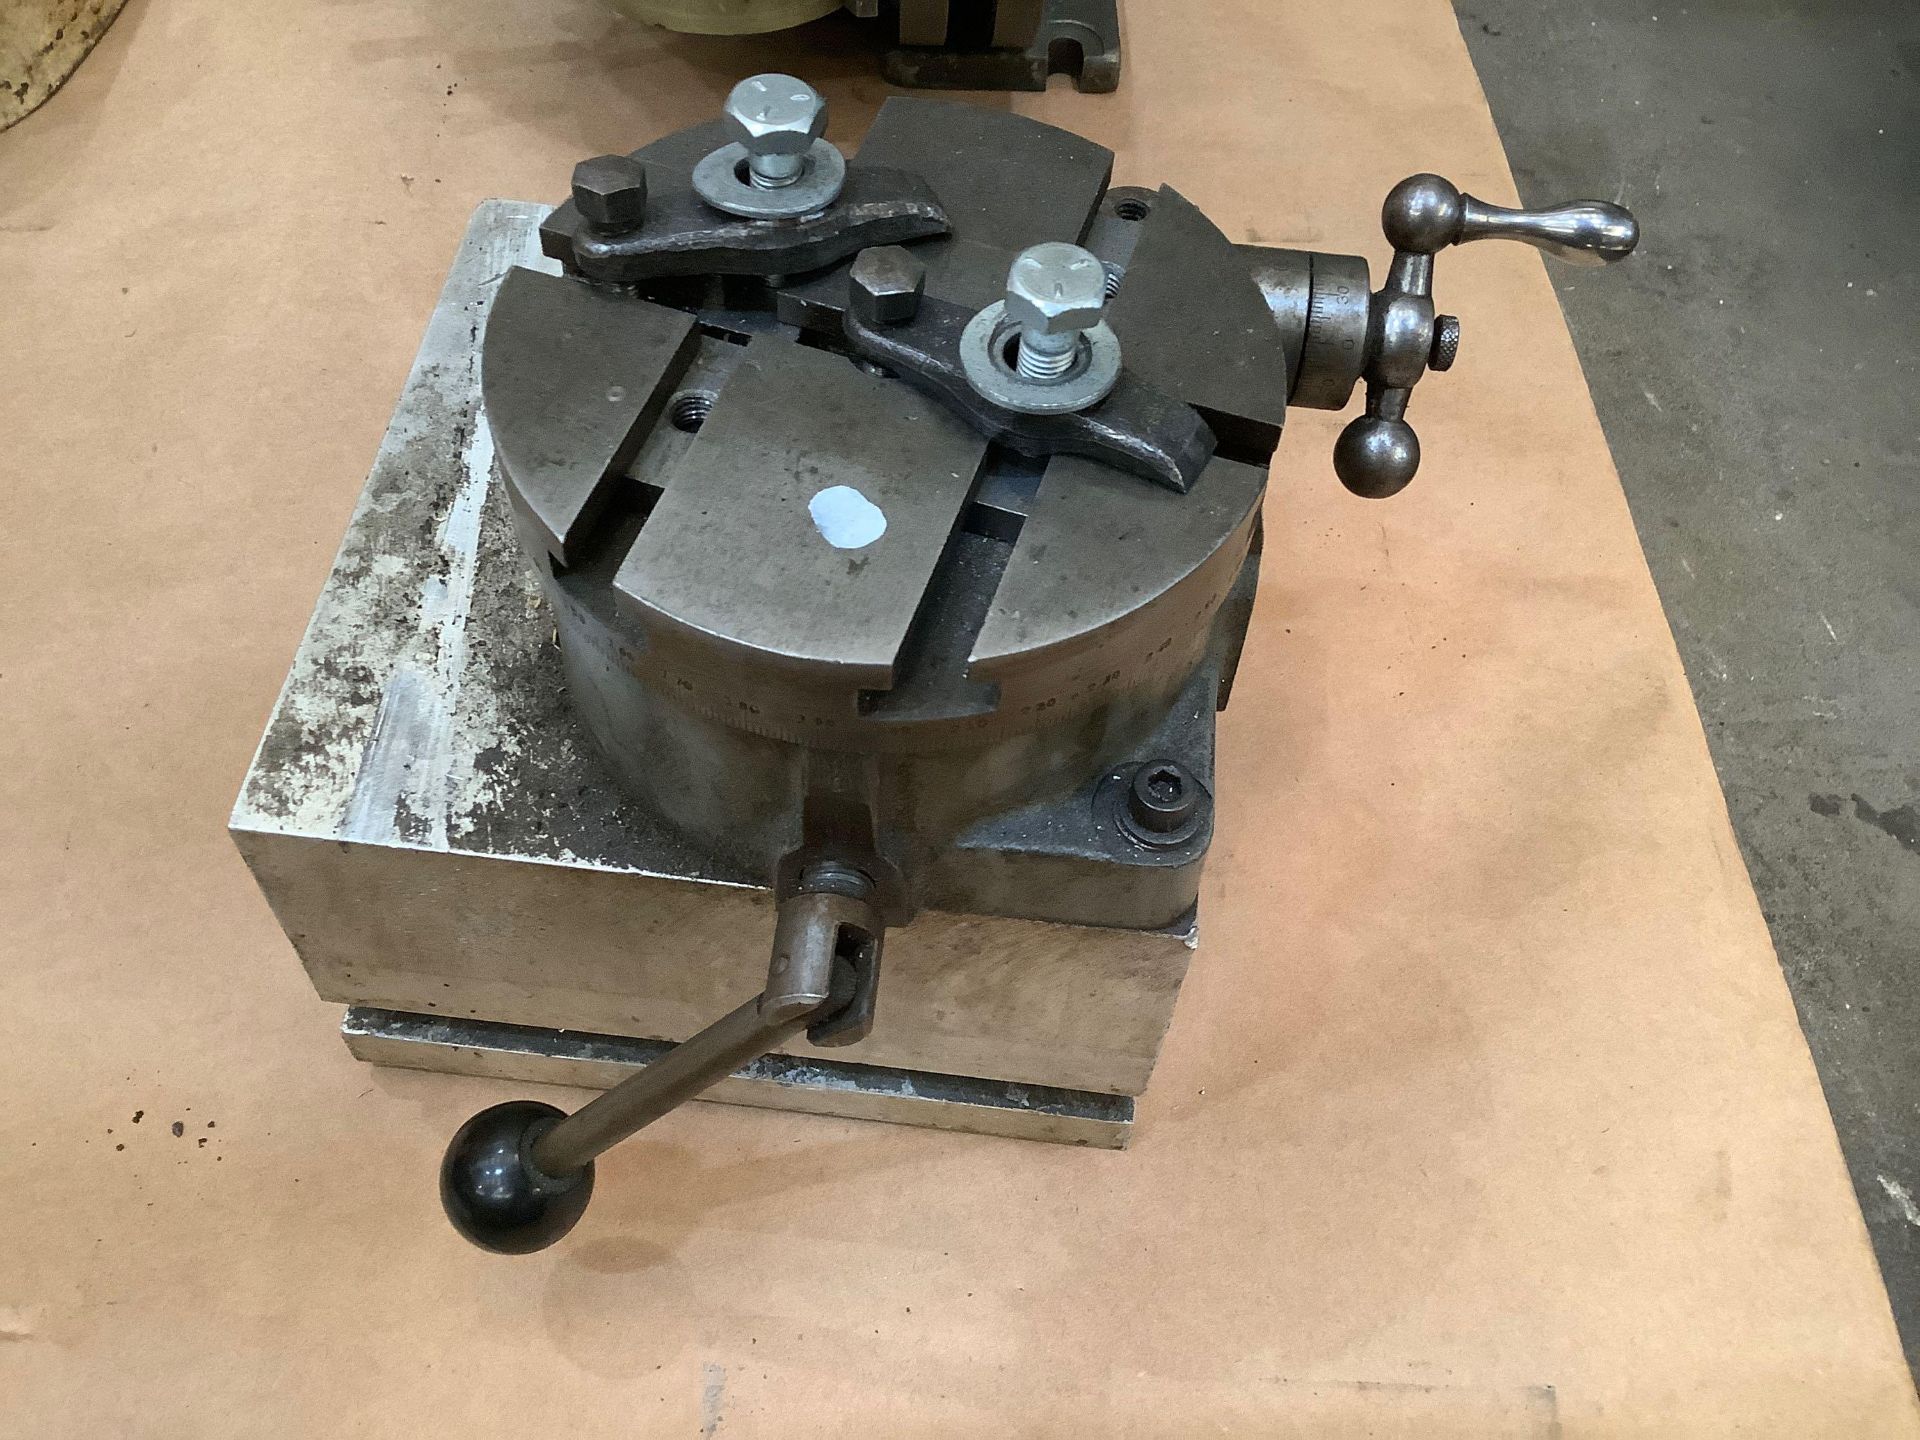 South Bend Indexer with 4-1/2" T-Slotted Table - Image 2 of 3